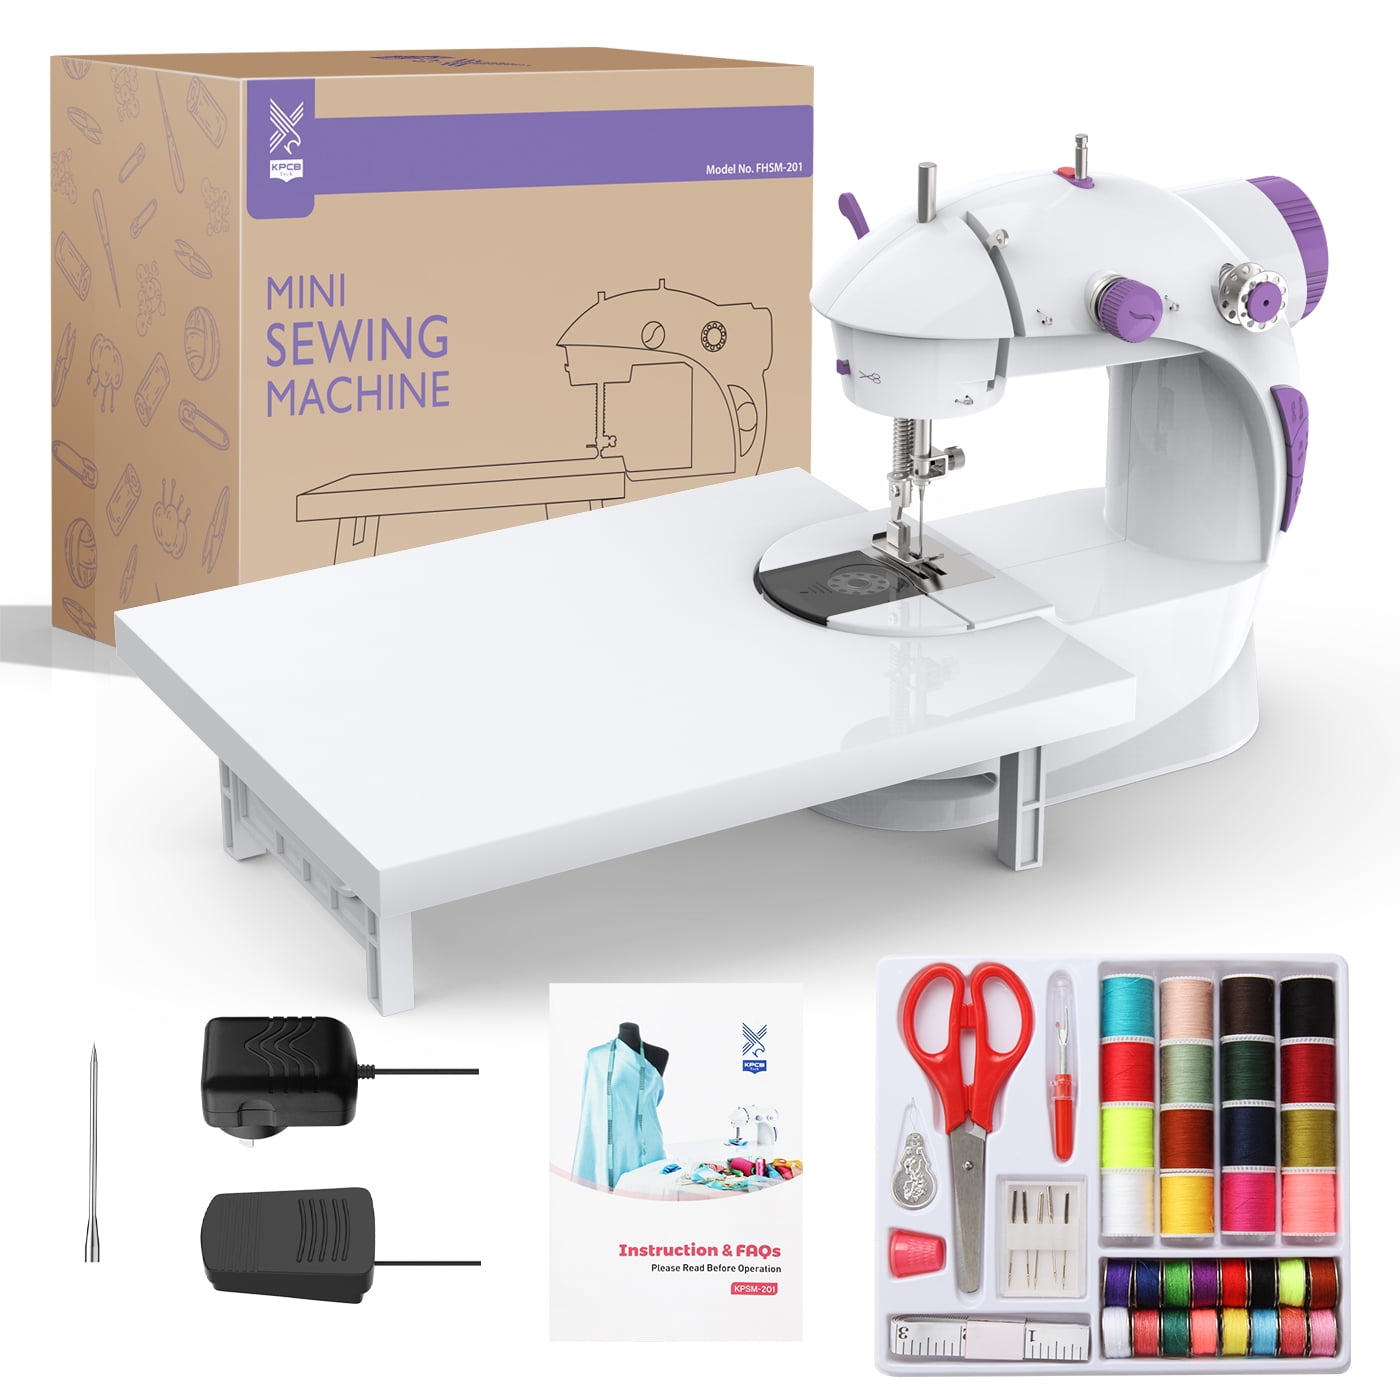  Mini Sewing Machine with 42PCS Sewing Kit, Foot Pedal